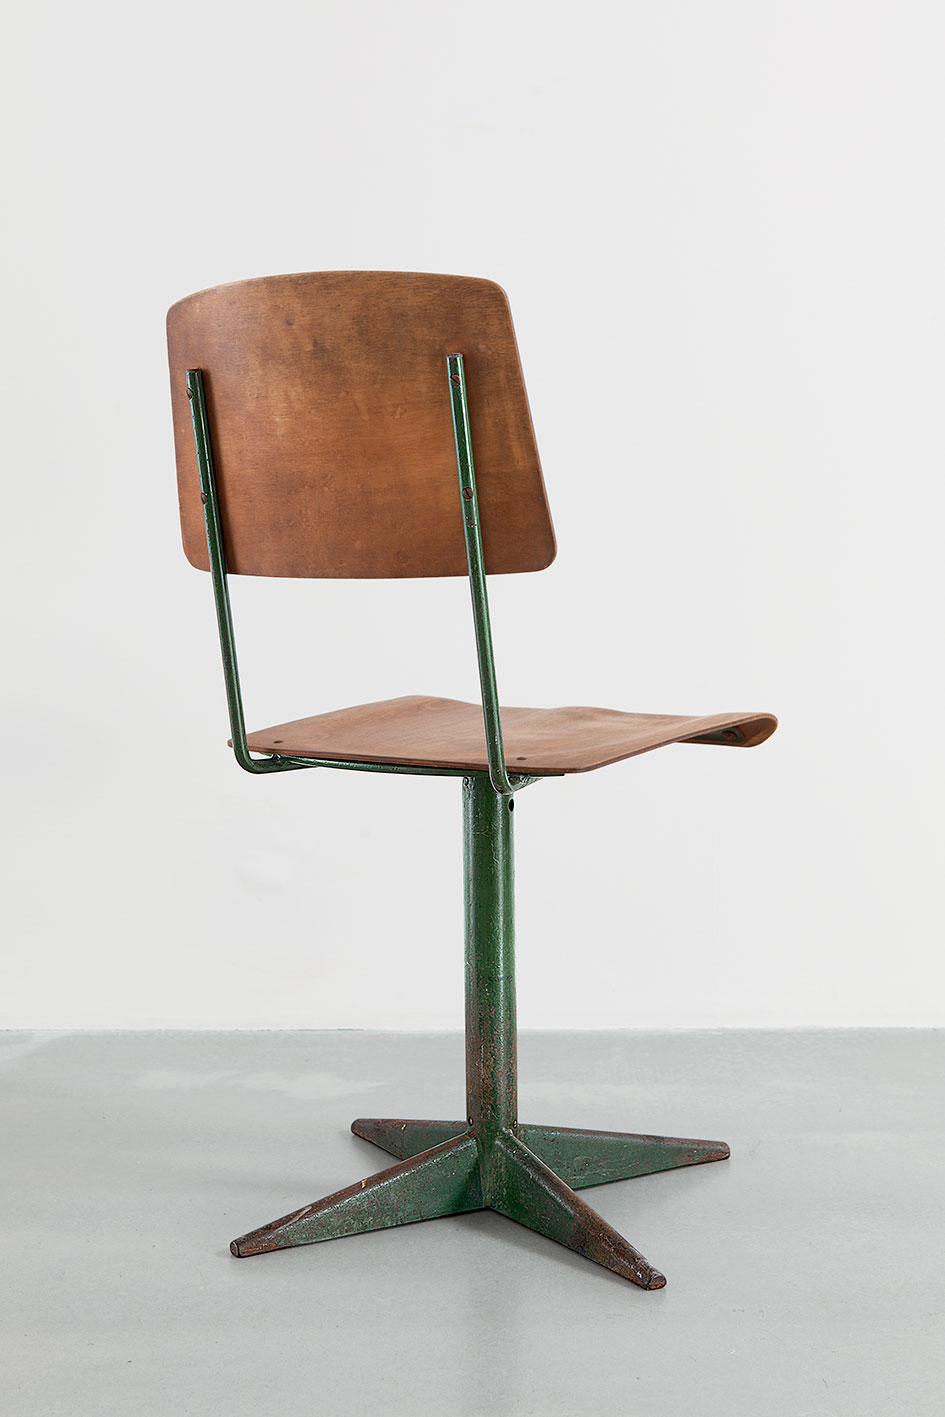 Dactylo CD 11 chair with seat and backrest in molded plywood, 1947.